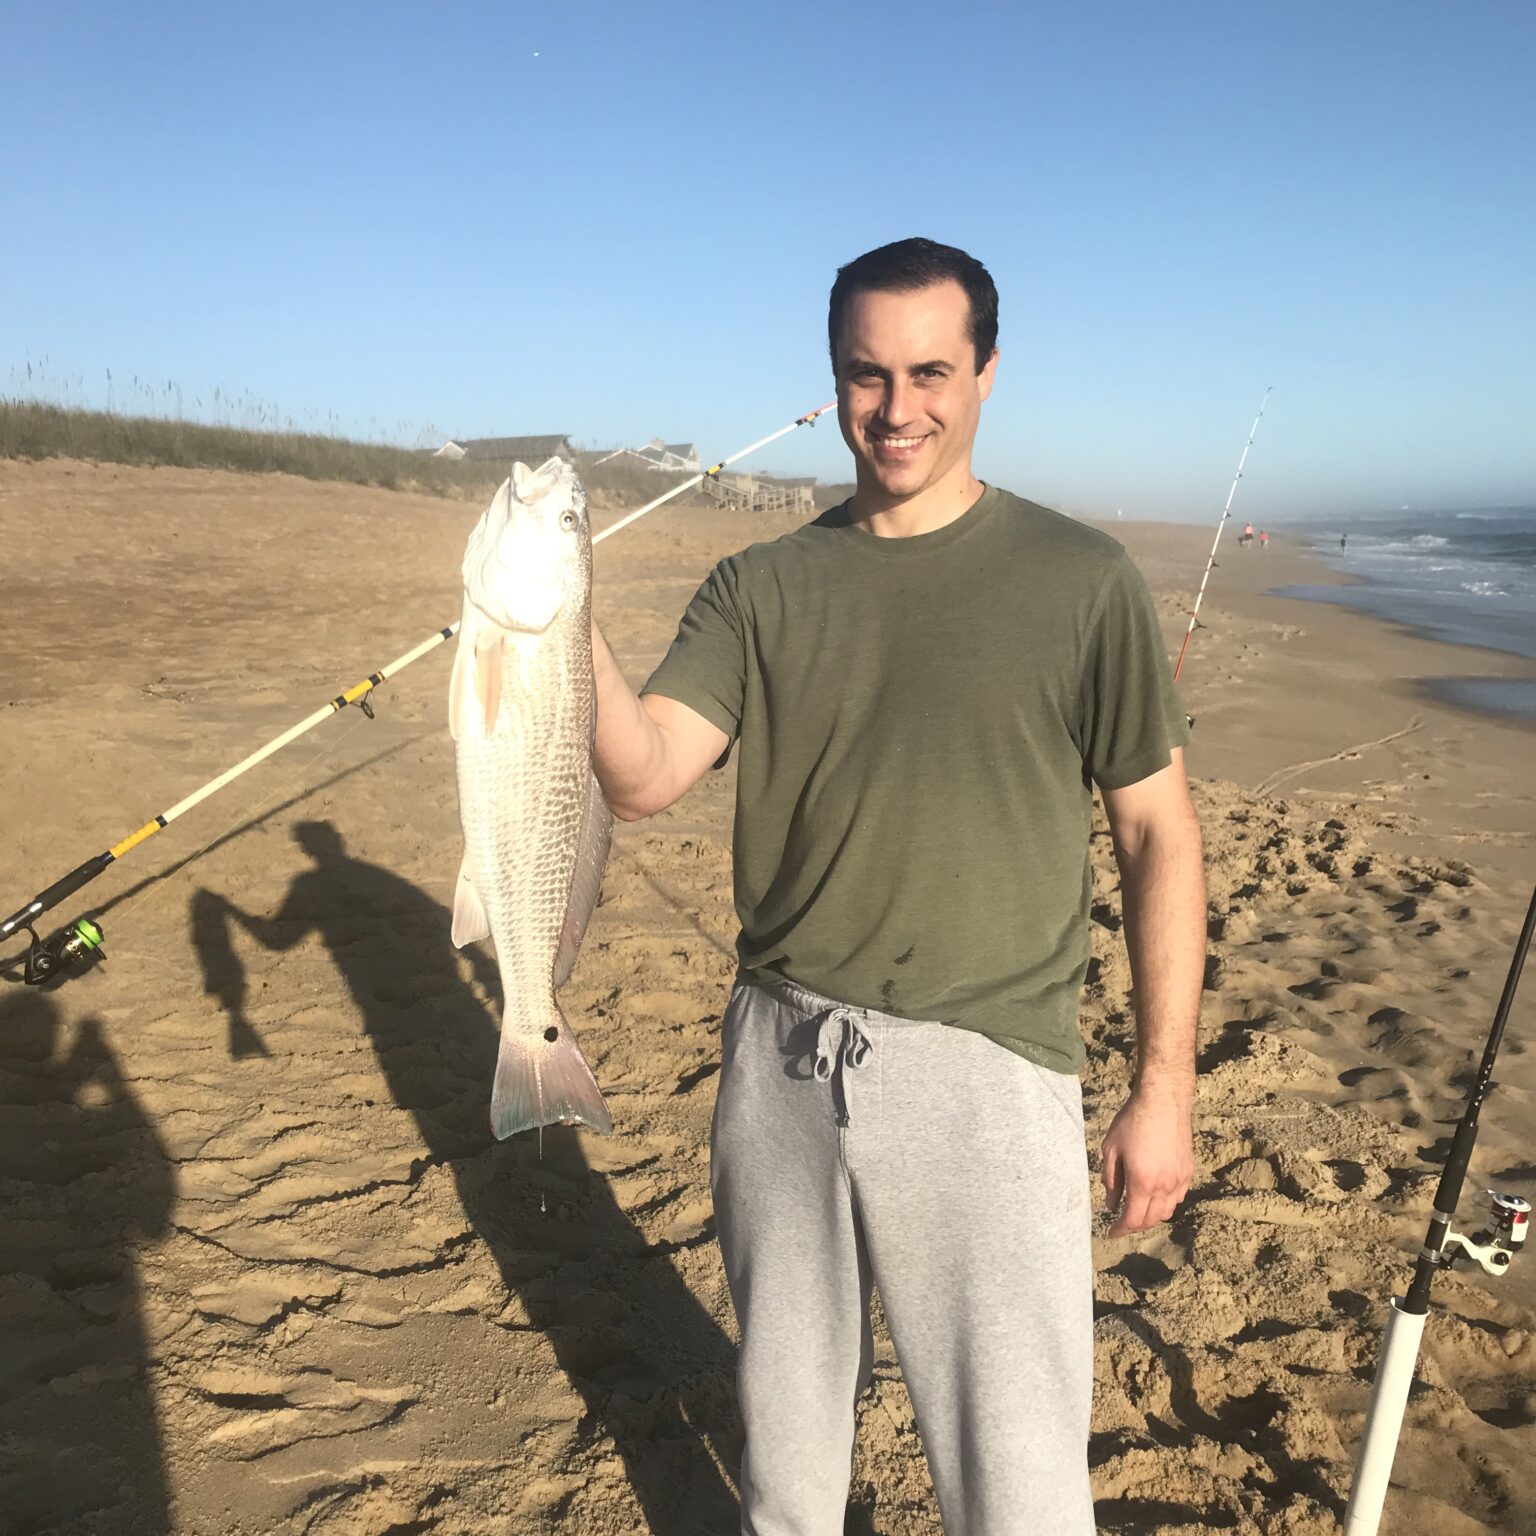 Outer Banks Surf Fishing Report